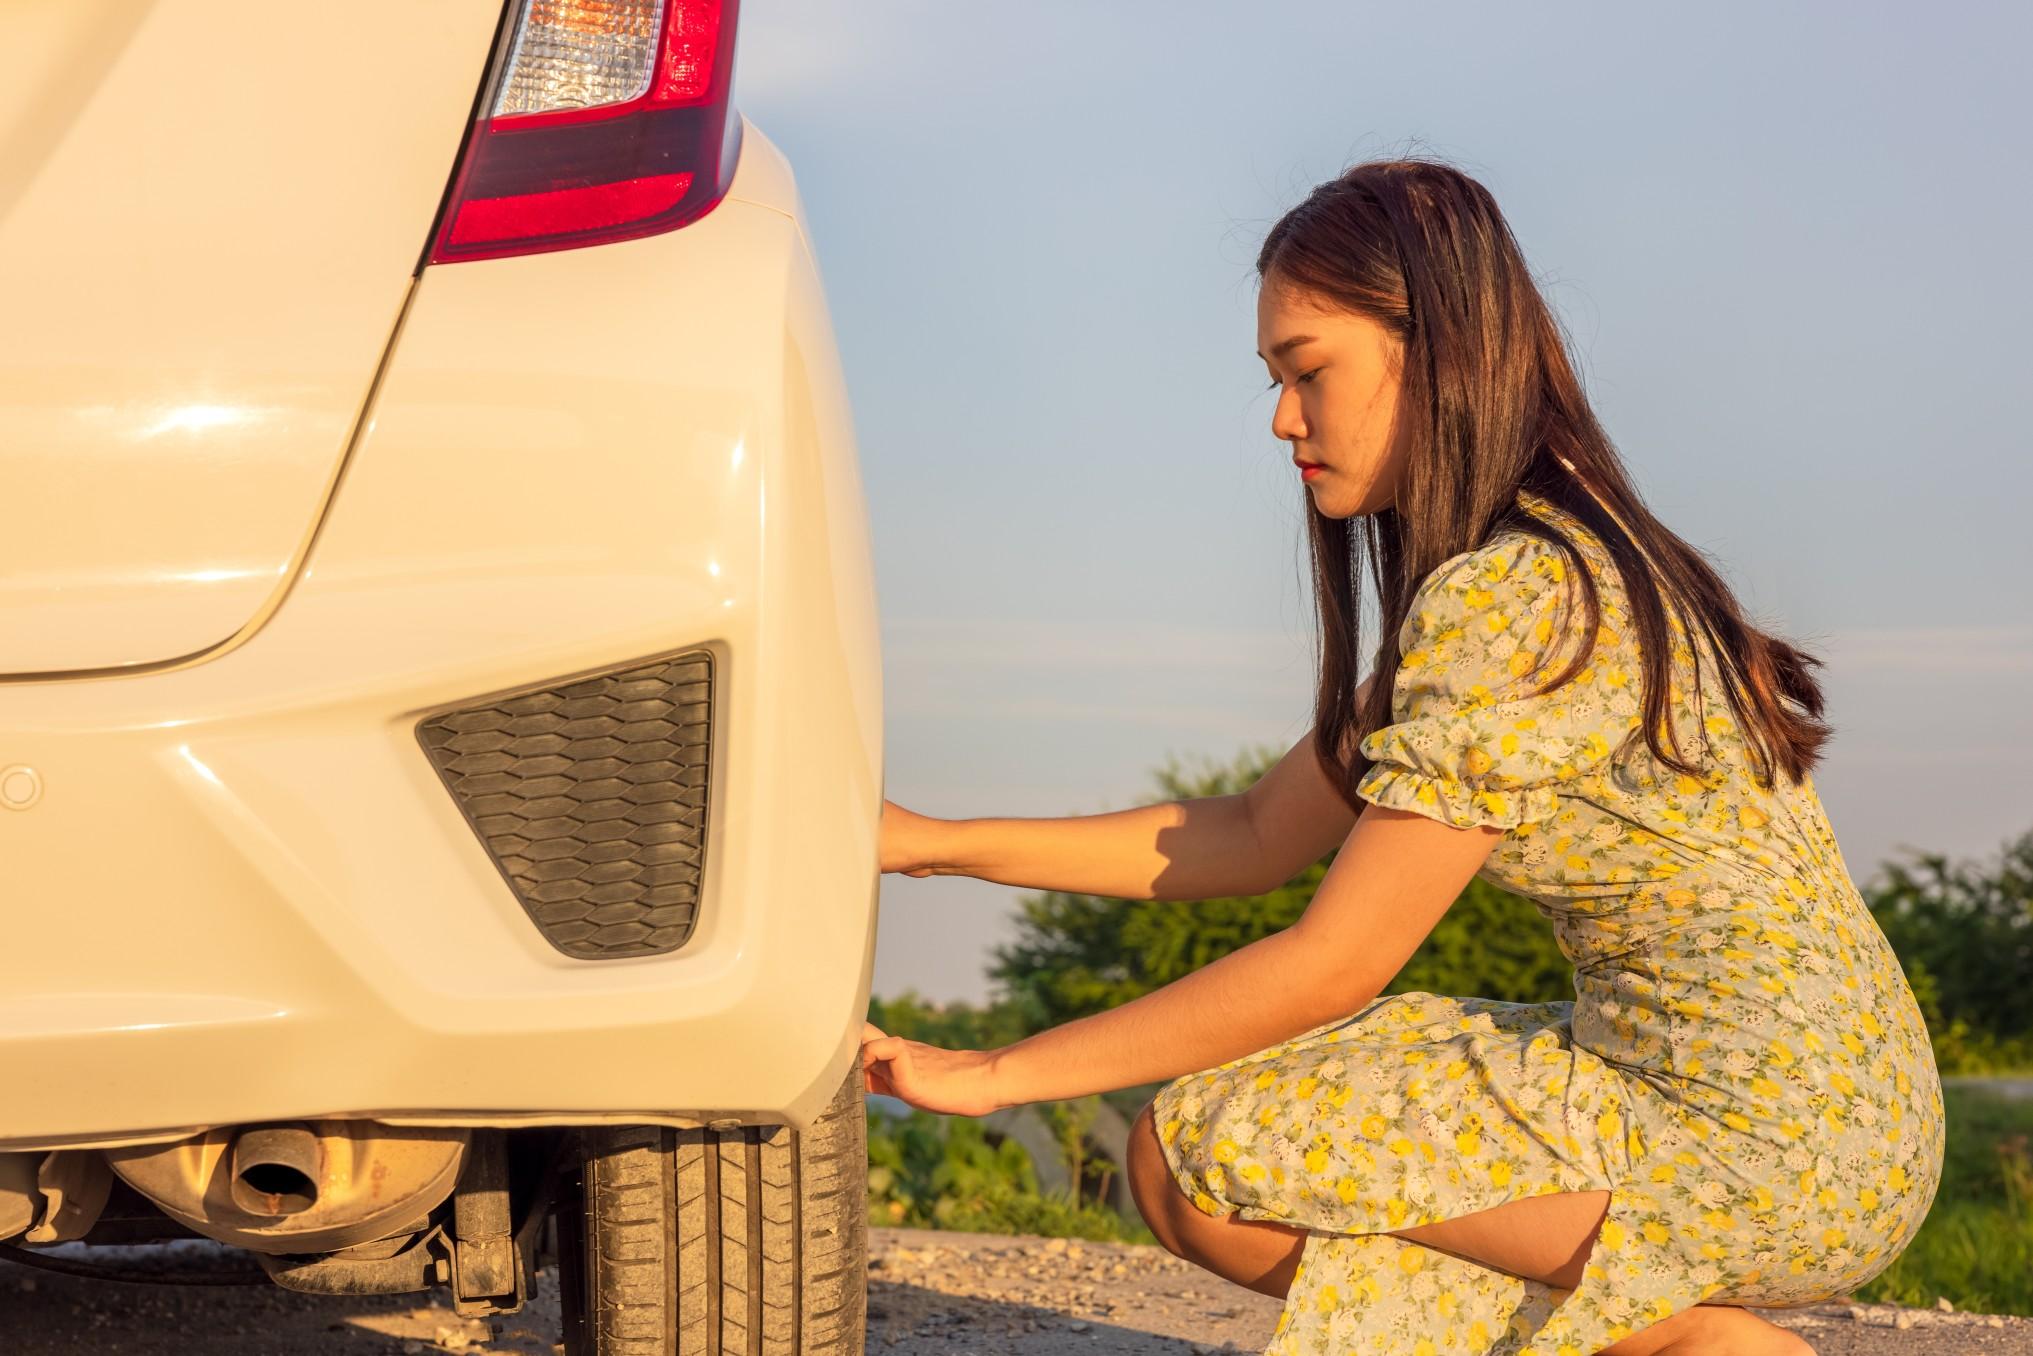 While you might not be able to tell if your car was keyed or scratched, learning about the damage and how to repair it will help you in this sticky situation. 